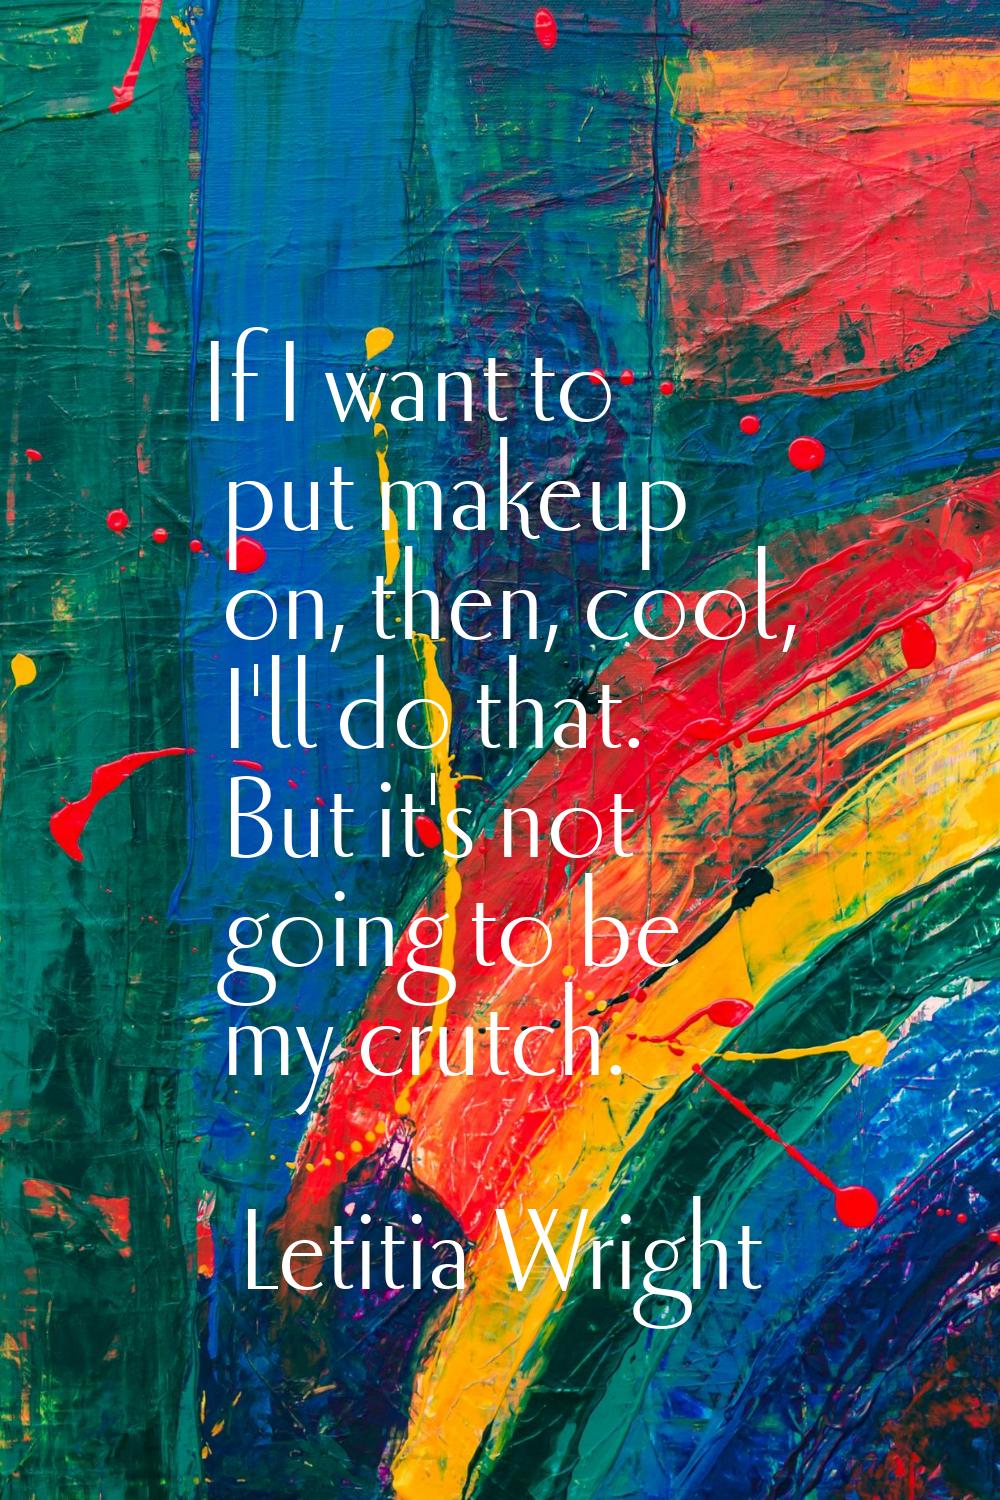 If I want to put makeup on, then, cool, I'll do that. But it's not going to be my crutch.